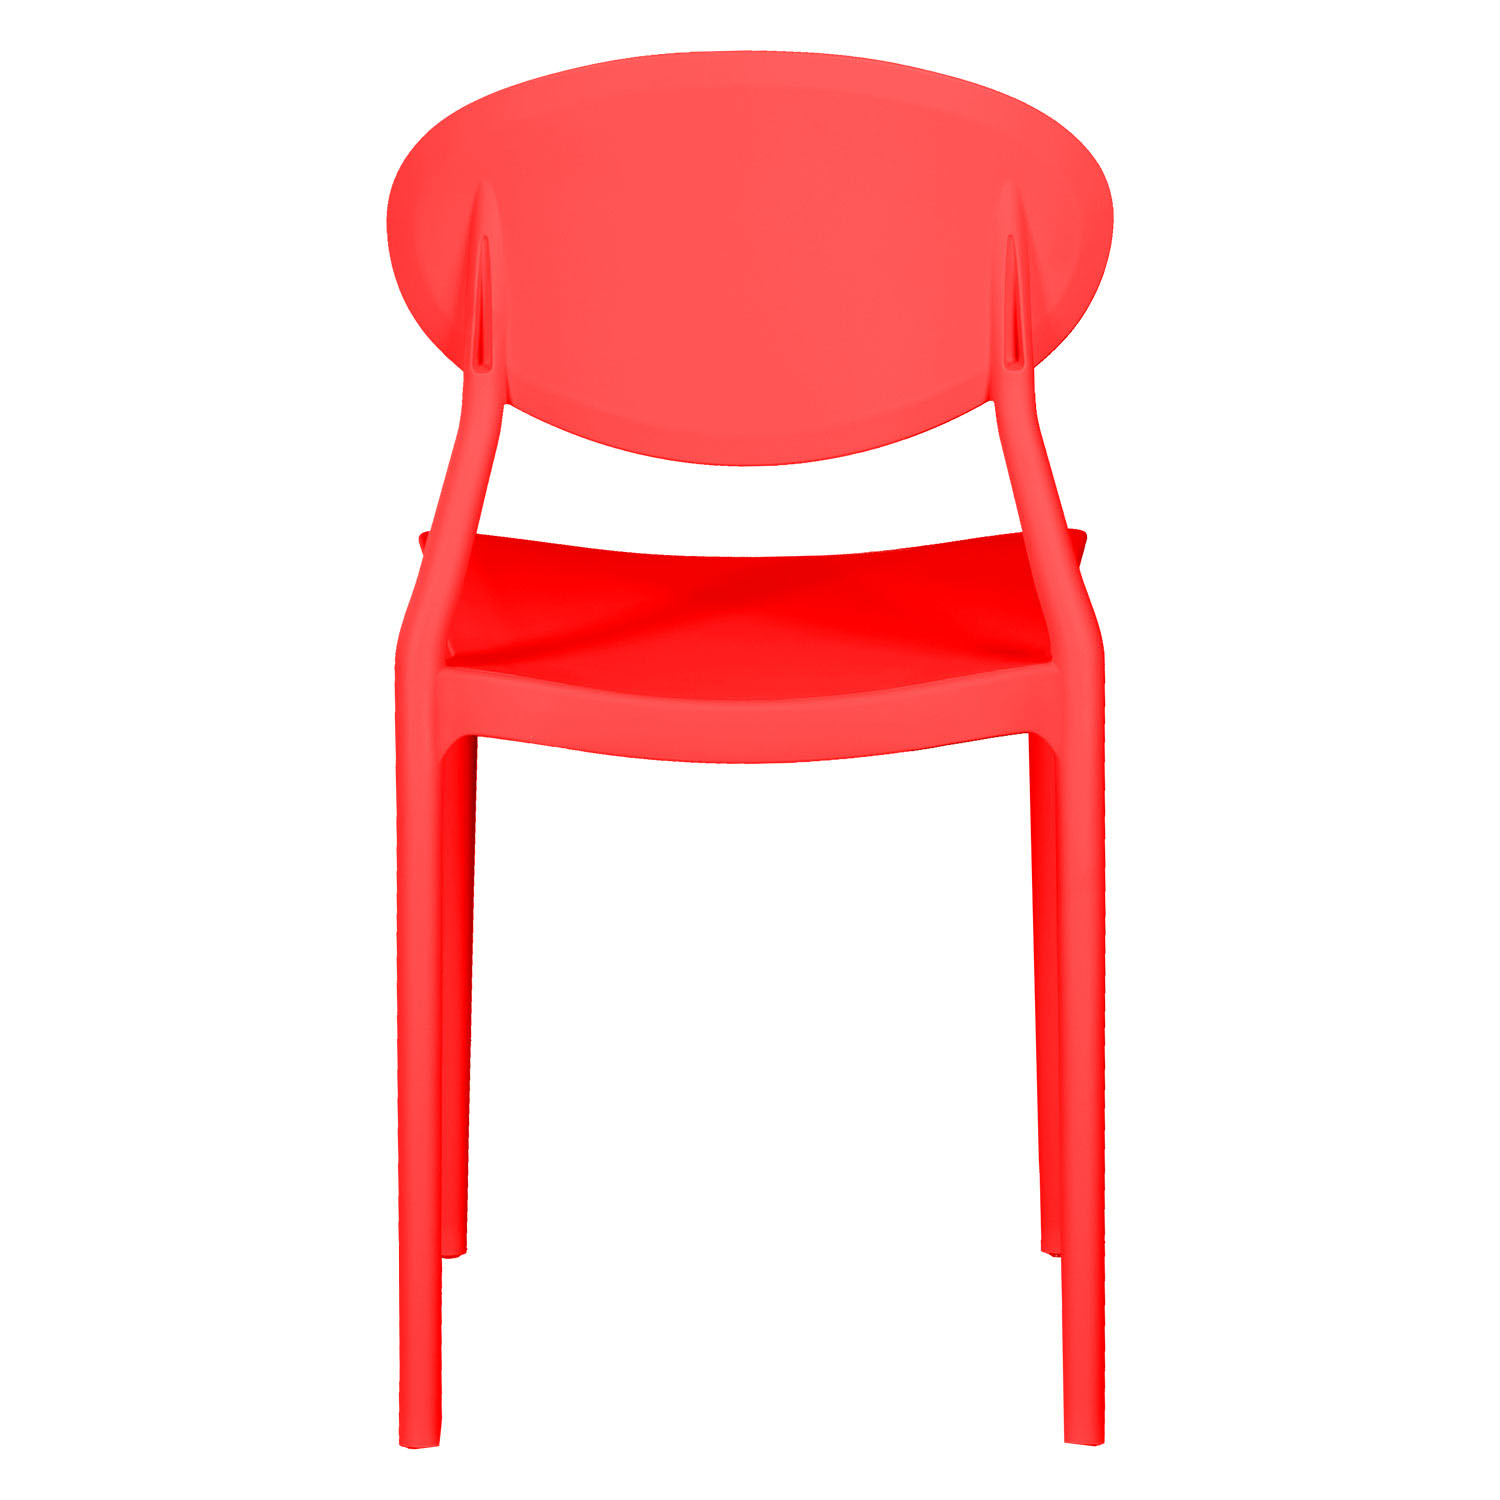 Garden chair Set of 4 Camping chairs Red Outdoor chairs Plastic Stacking chairs Kitchen chairs